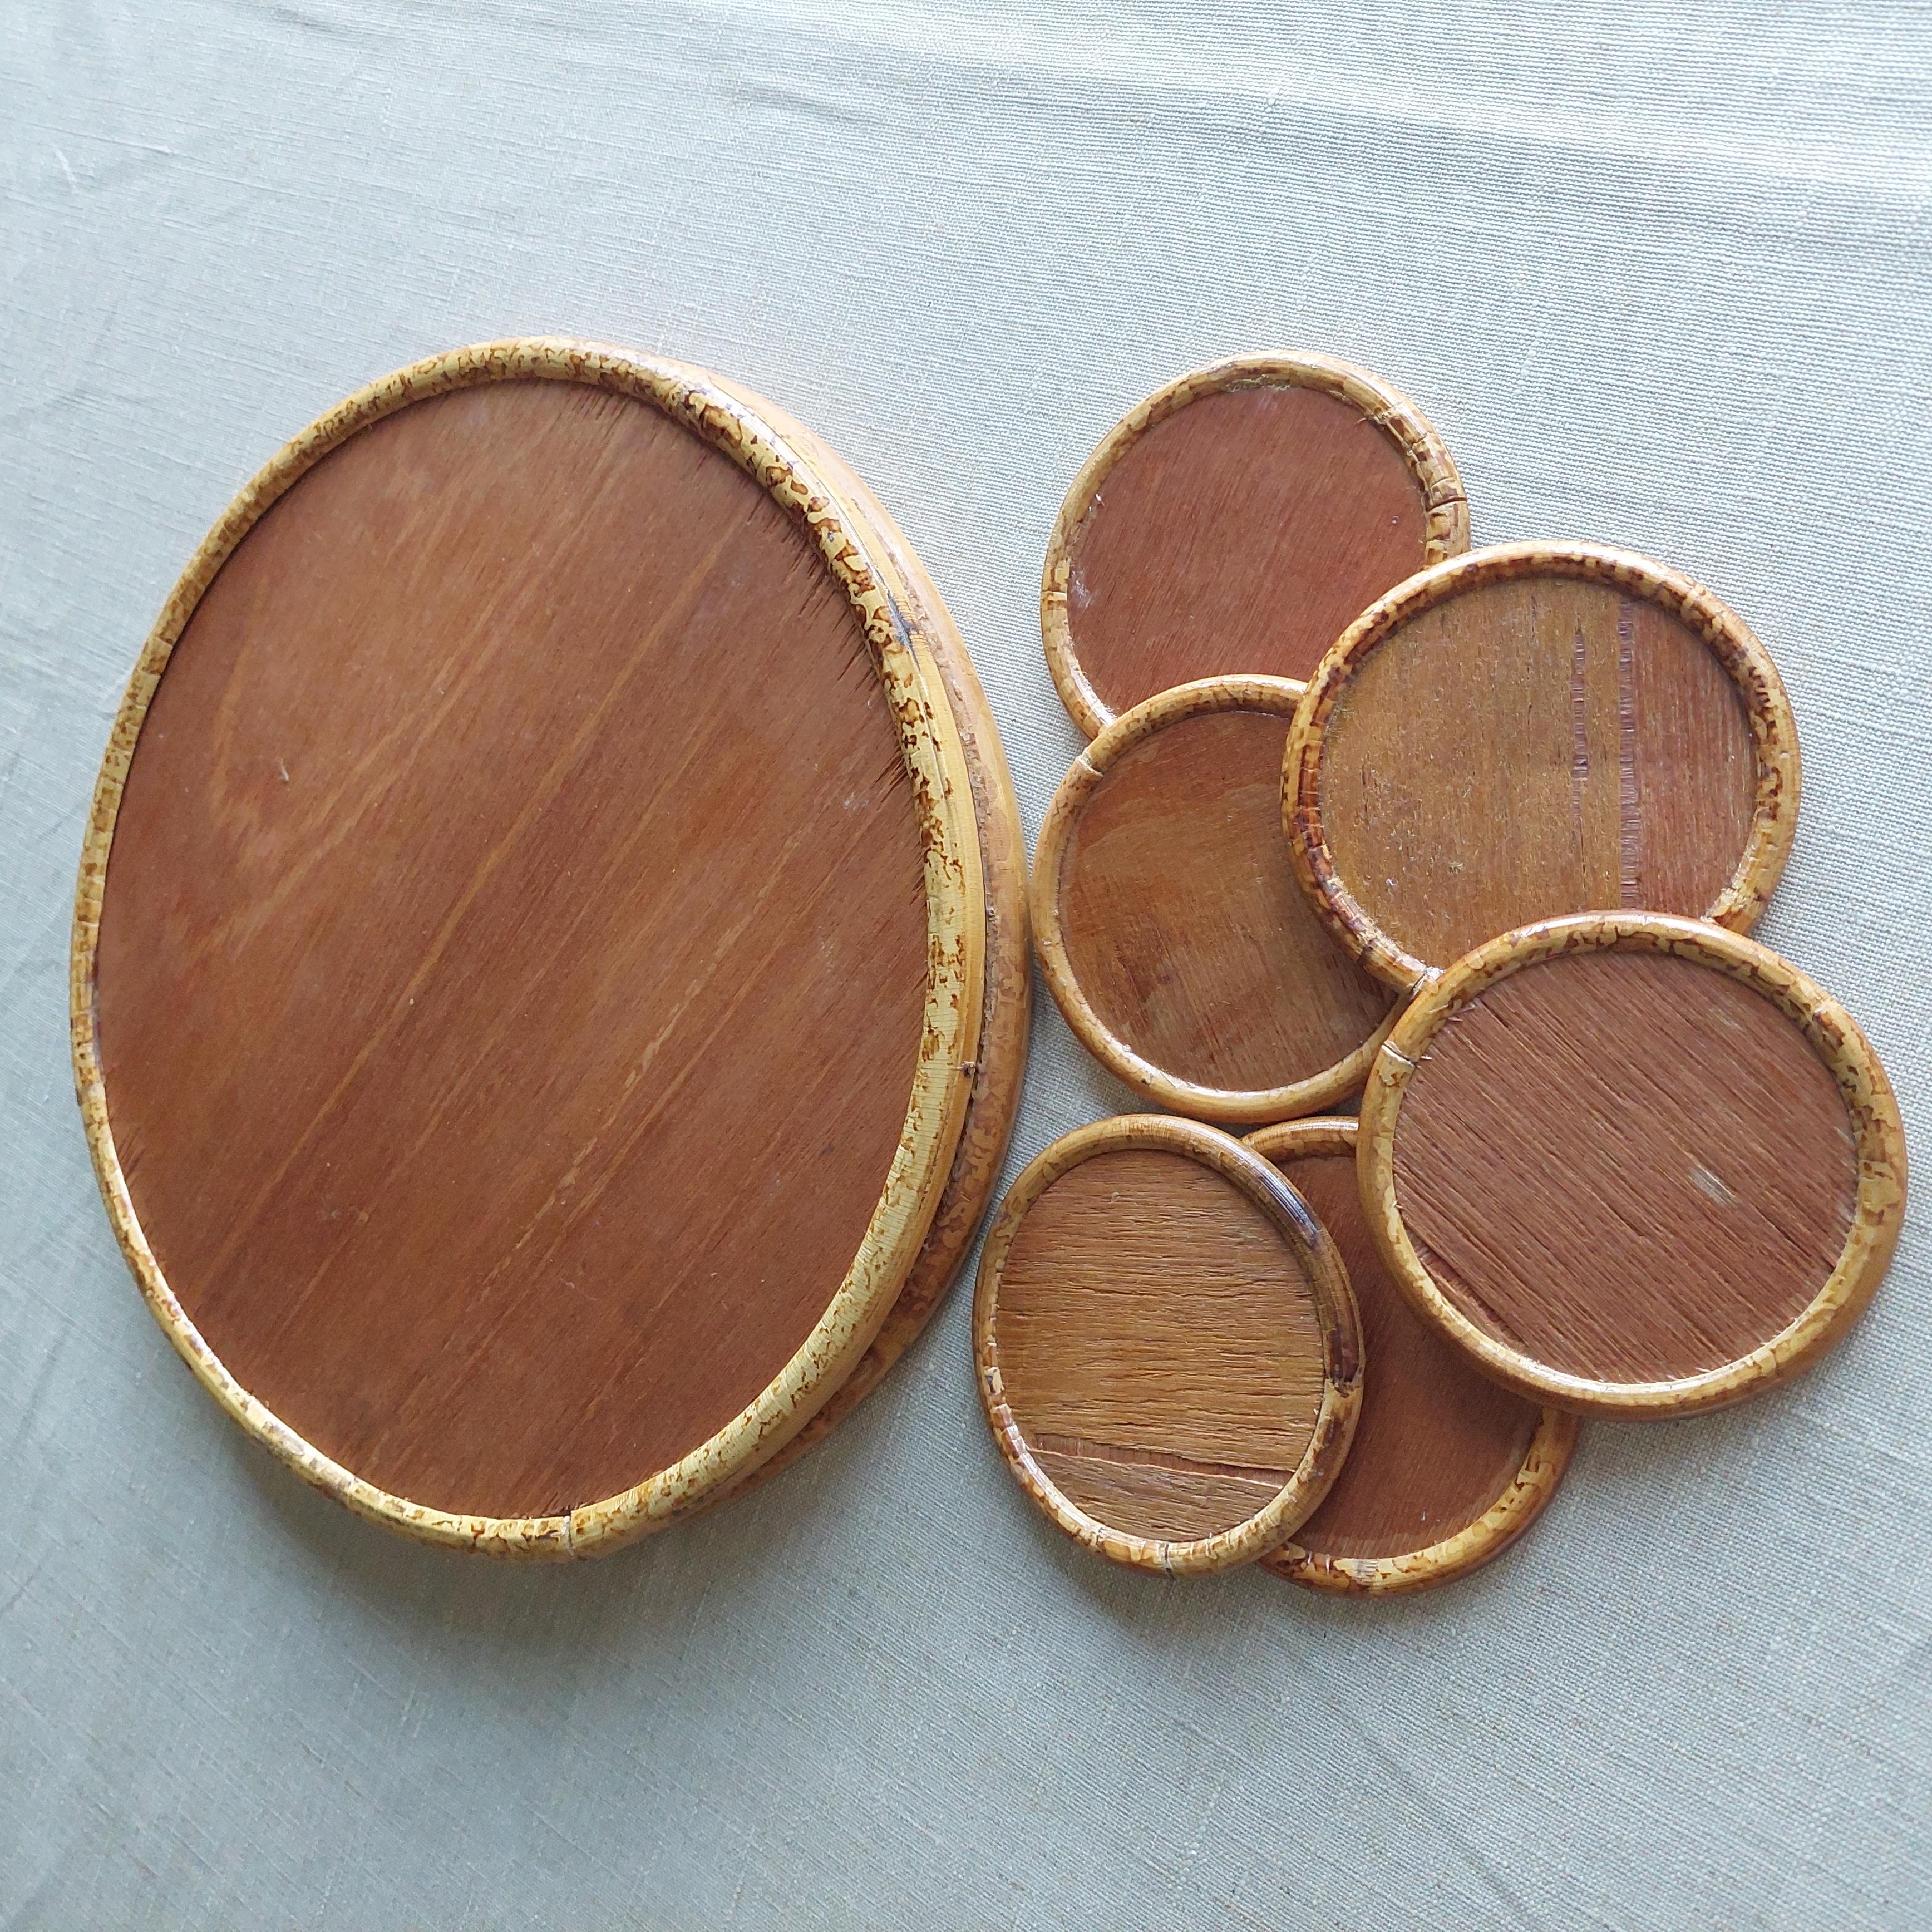 Vintage mid century 70s bamboo serving tray & coasters set For Sale 1